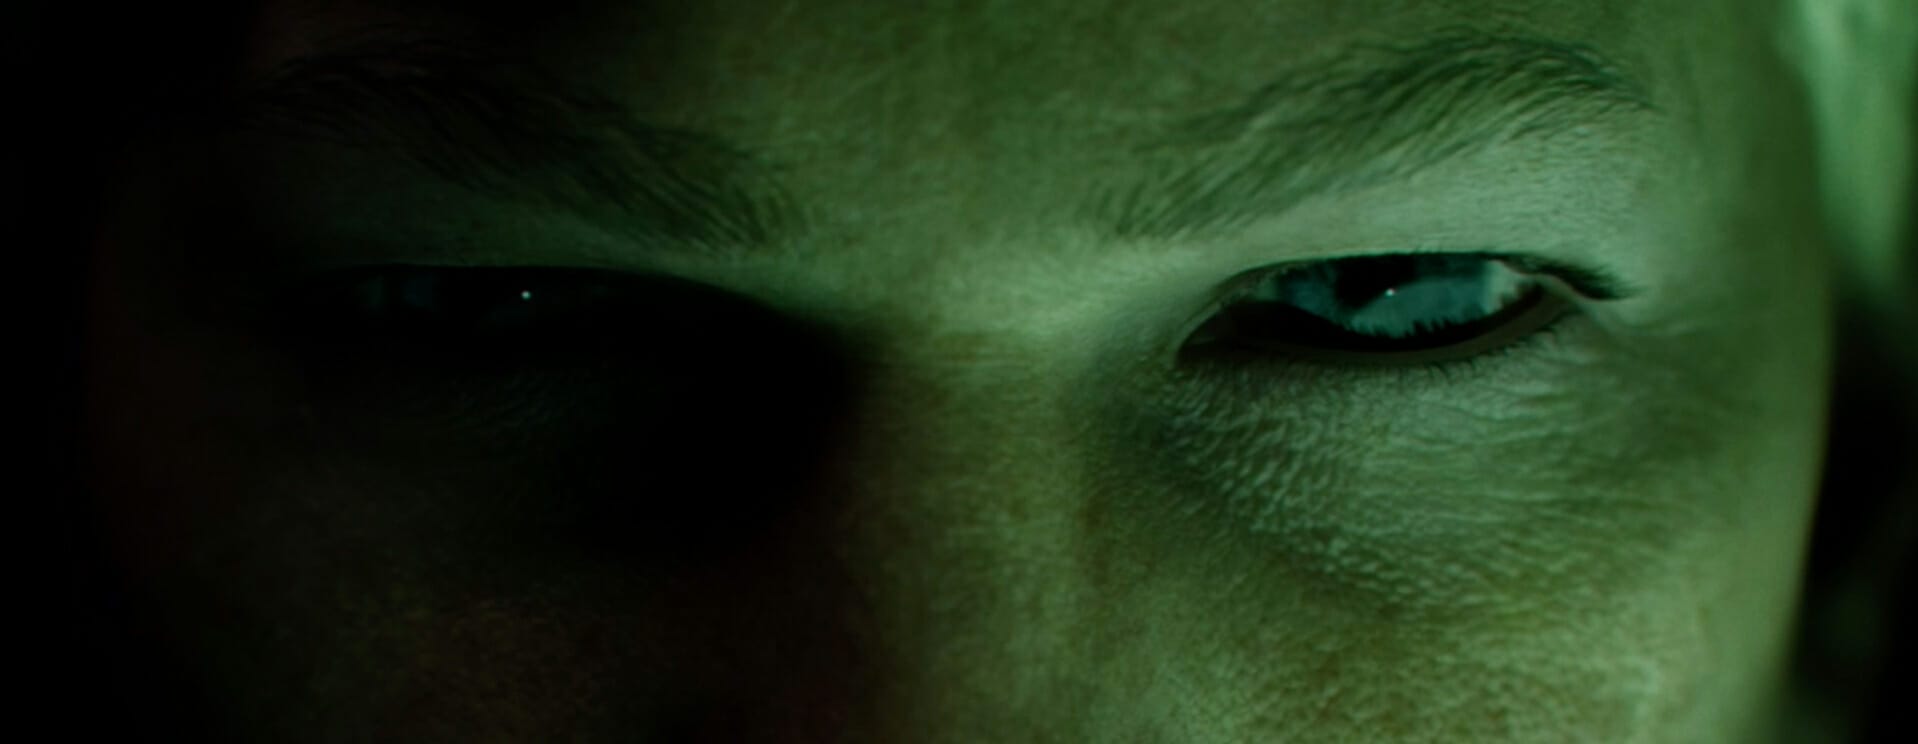 Intense close-up of an eye, set against a dark background. The text 